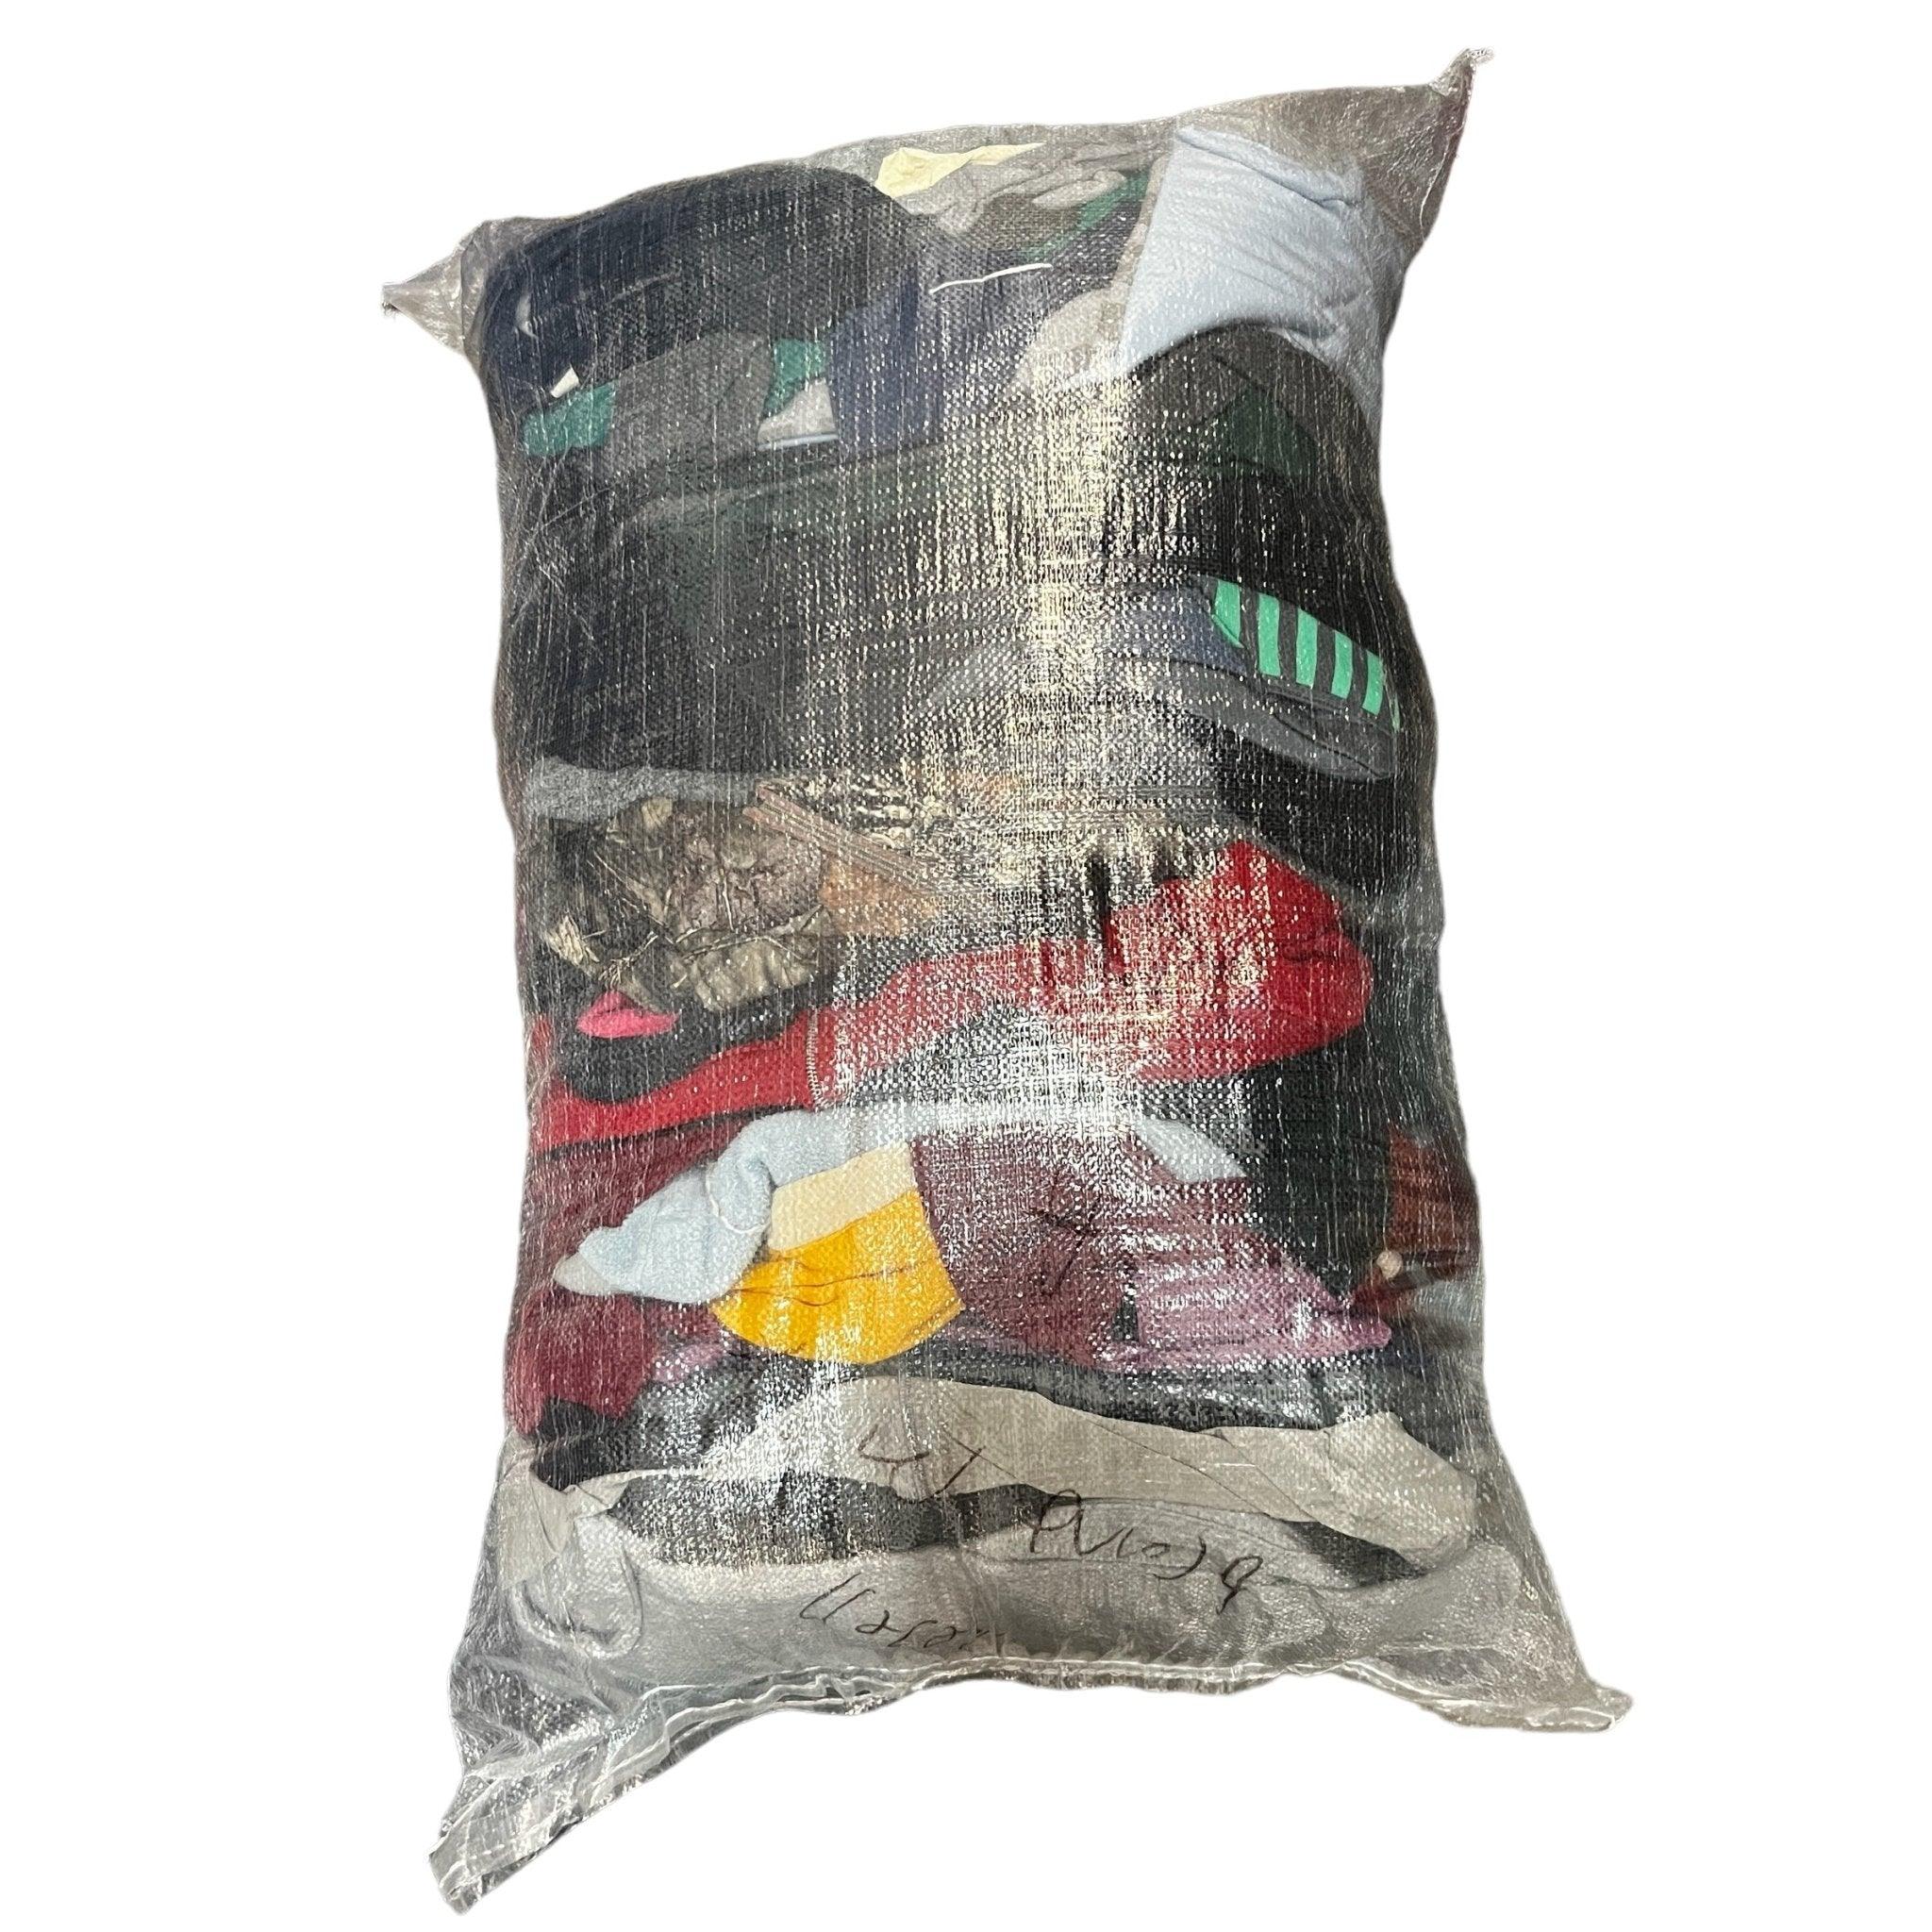 Branded Resell Mix Sack 50LBS - Visione Vintage